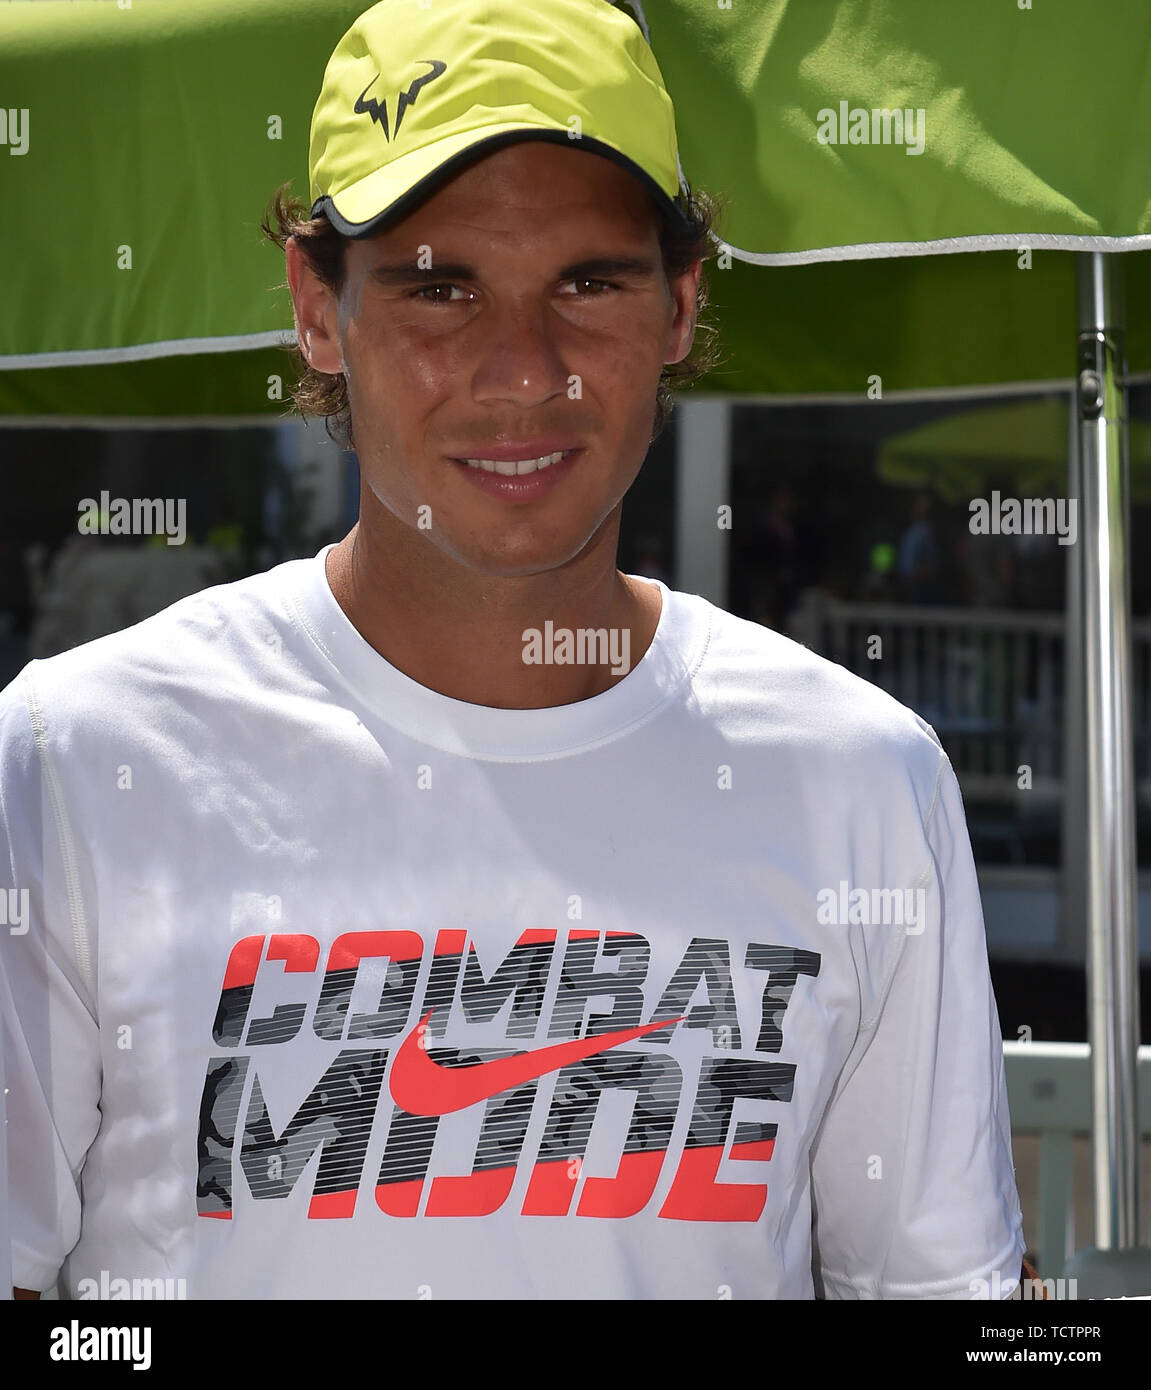 KEY BISCAYNE, FL - MARCH 24: Rafael Nadal speaks to the media during Day 2 of the Miami Open at the Crandon Park Tennis Center on March 24, 2015 in Key Biscayne, Florida. People: Rafael Nadal Credit: Storms Media Group/Alamy Live News Stock Photo